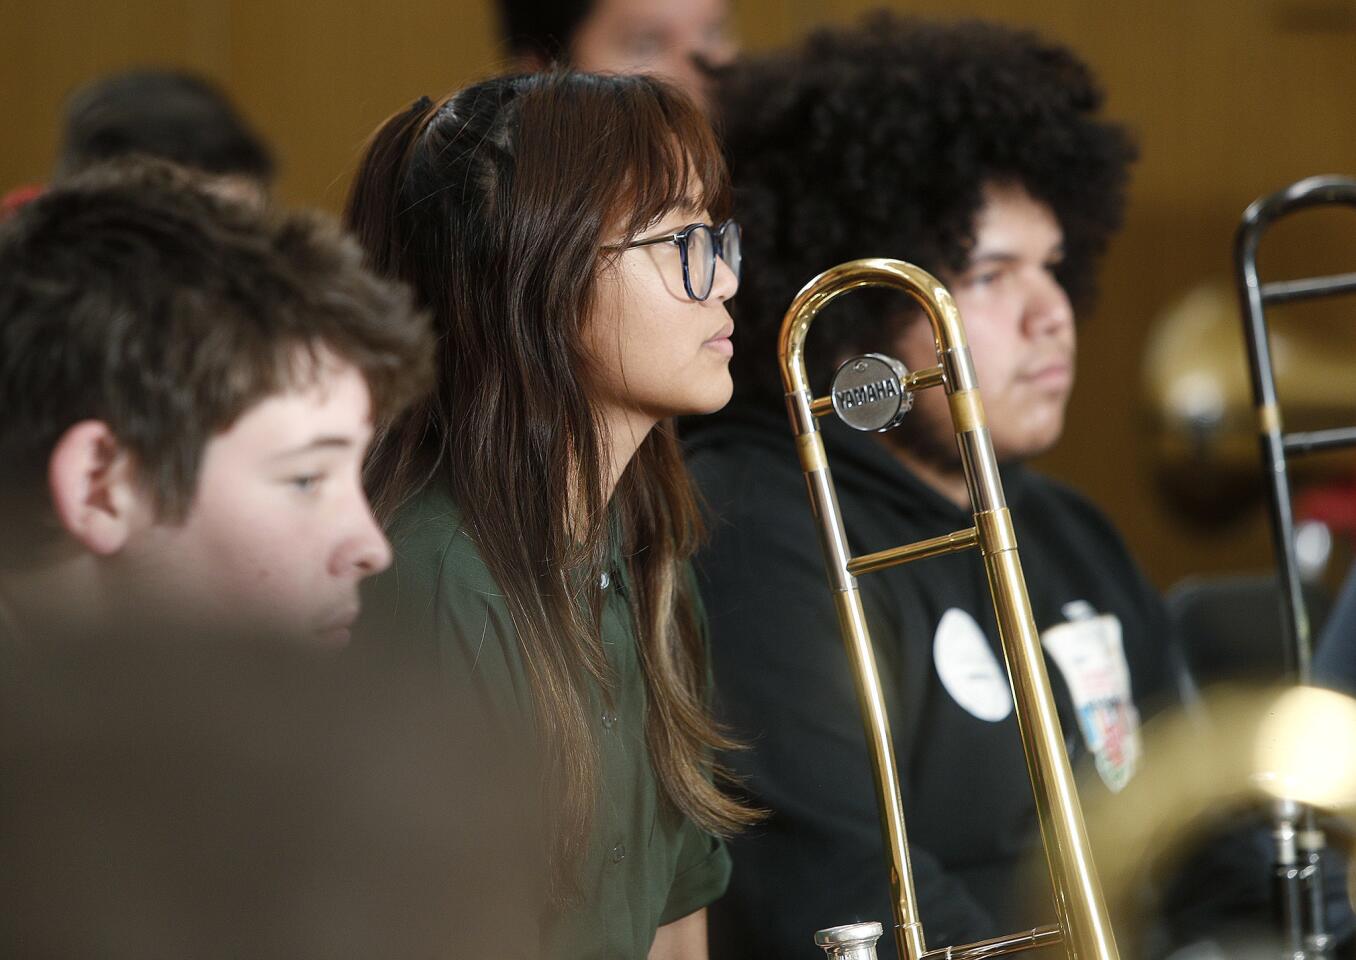 Photo Gallery: Jazz trombonist Nick Finzer visits Glendale High School for a regional trombone lesson and discussion